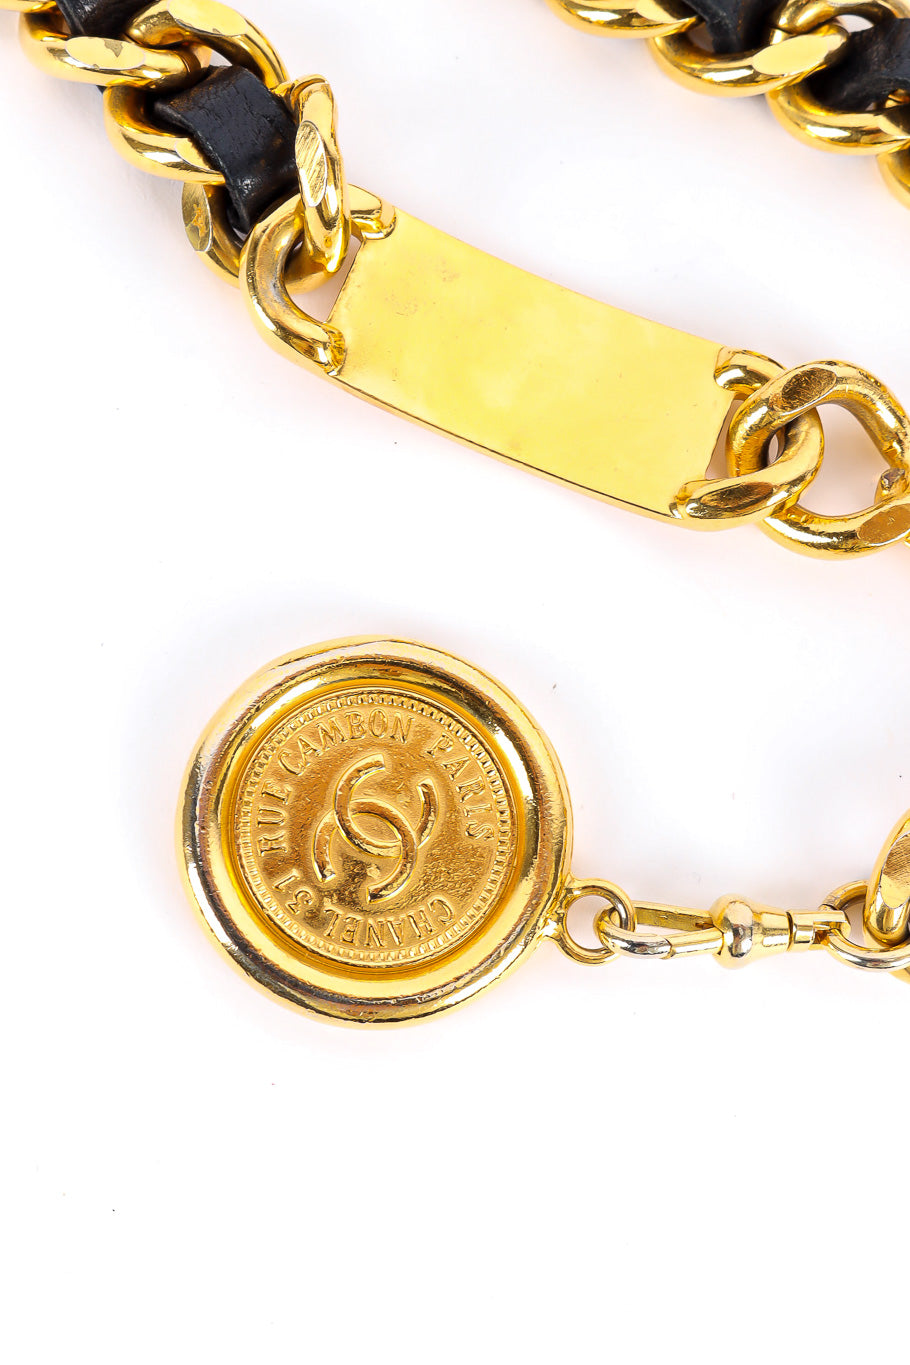 Iconic vintage coin belt by Chanel Photo of Medallion and Plaque. @recessla